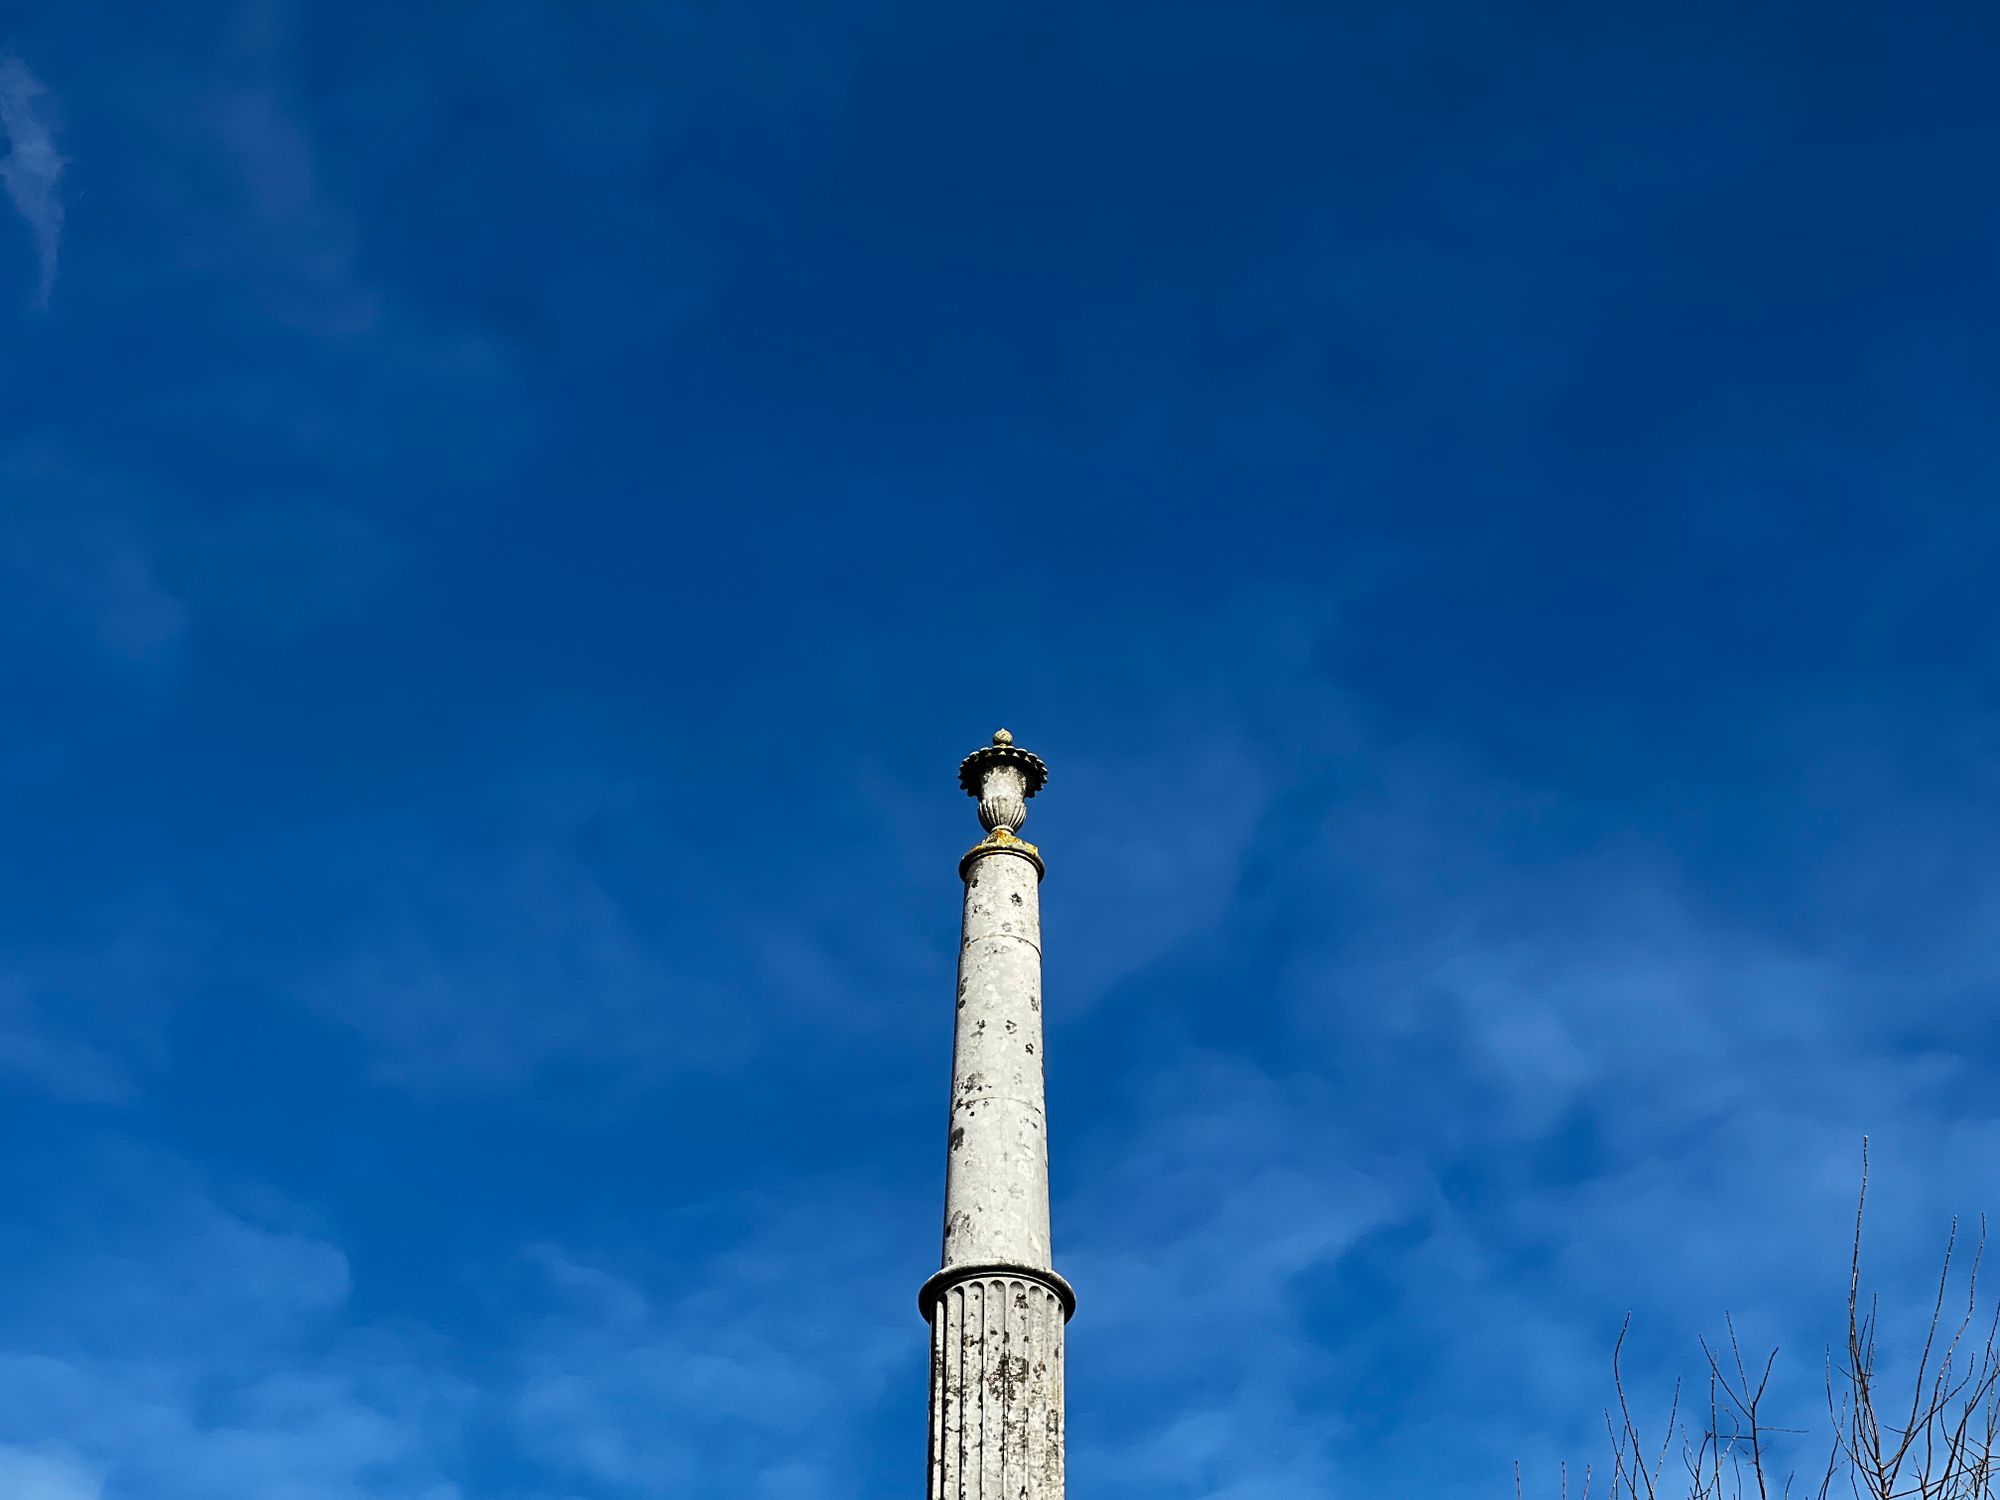 A weathered round stone obelisk with a gourd-like feature on the top, on a clear day.